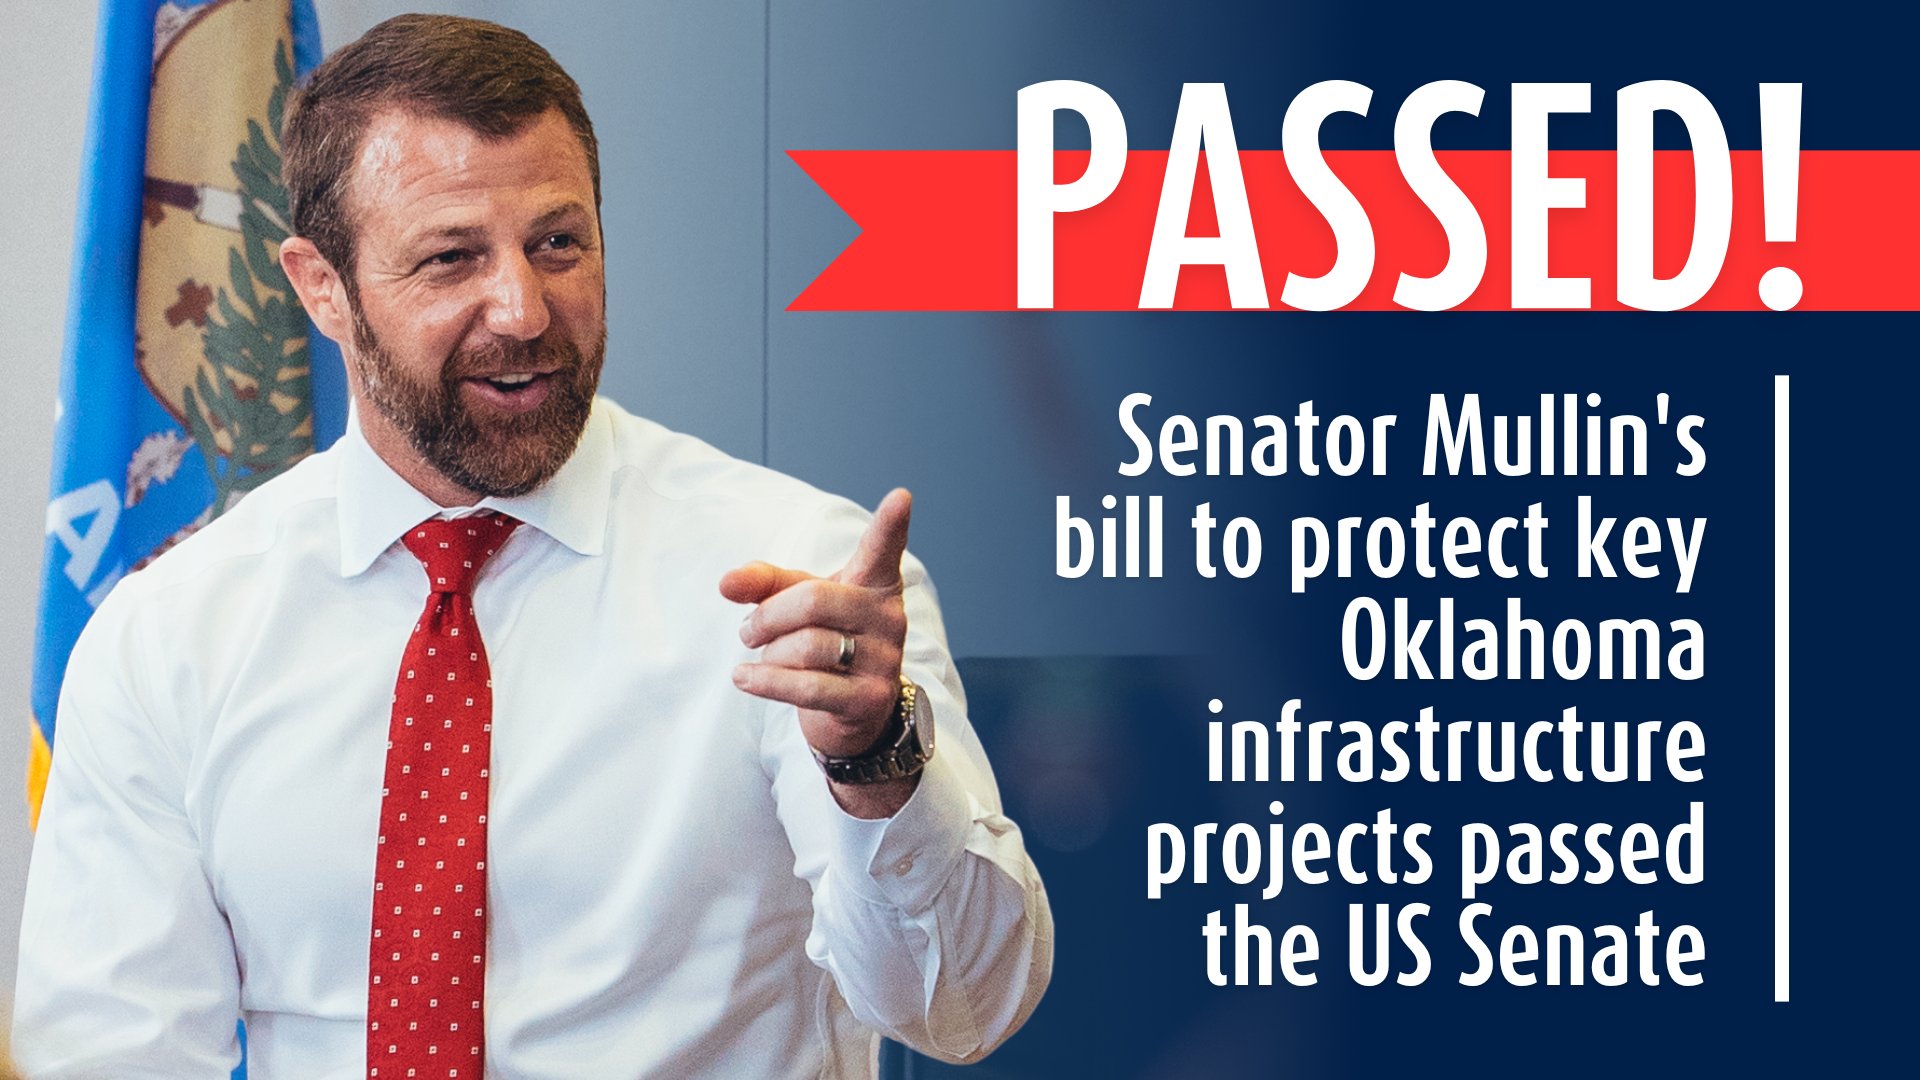 Markwayne Mullin on Twitter: "🚨 NEWS: The Senate just passed my resolution to reverse a burdensome regulatory penalty and protect key OK infrastructure projects. Our legislation to strike down the Biden admin's